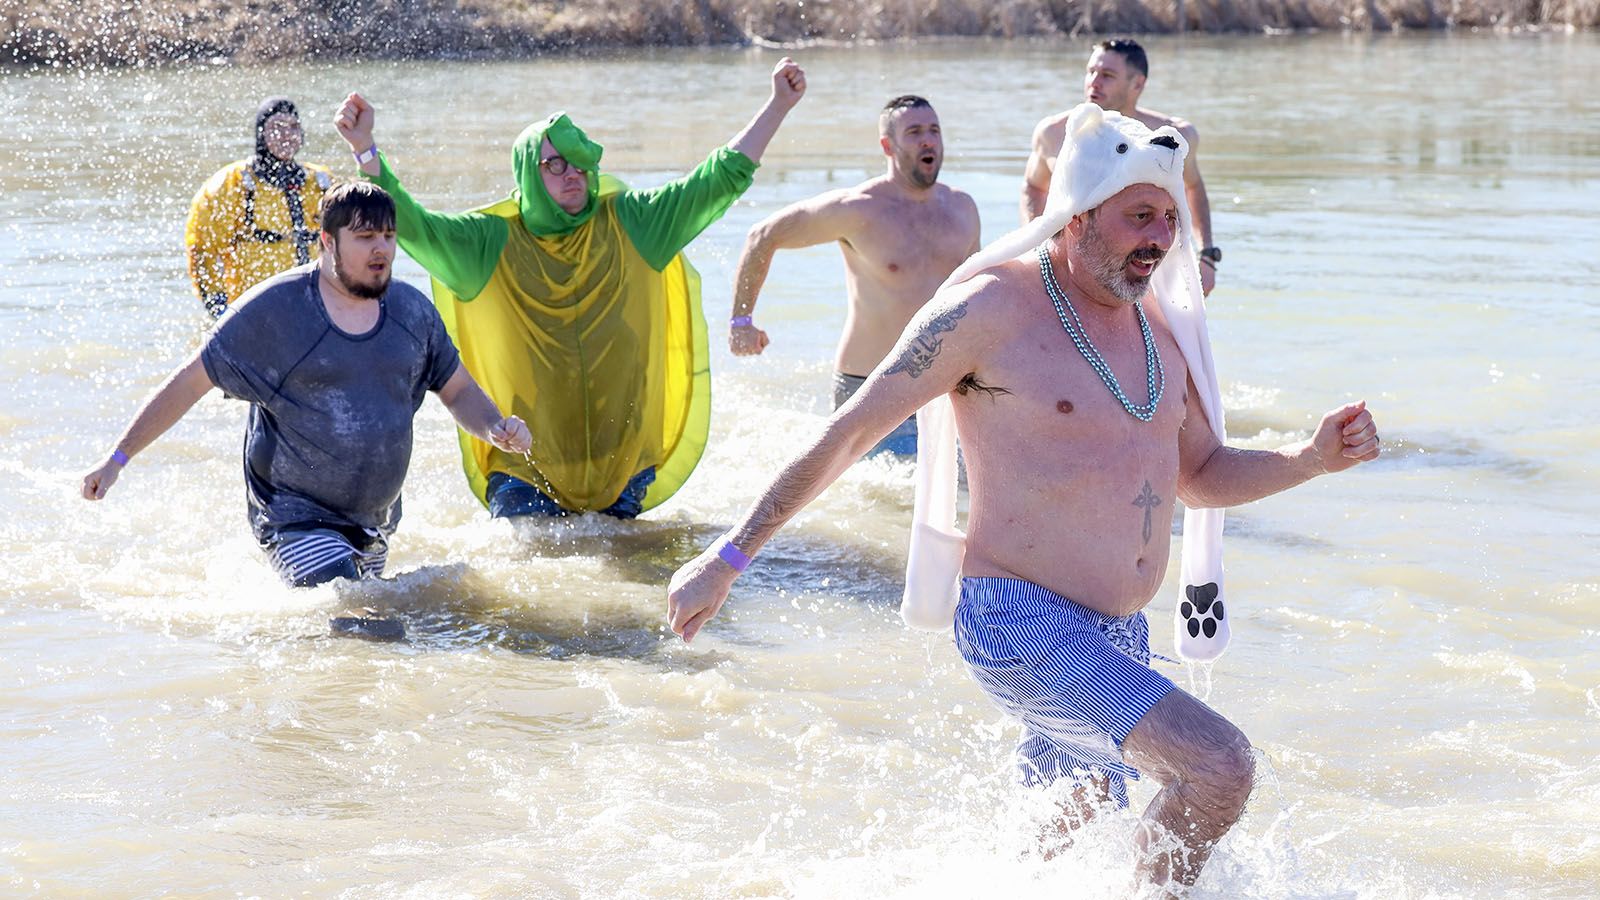 This year's Polar Plunge will be Saturday, Feb. 10, at Metea County Park.